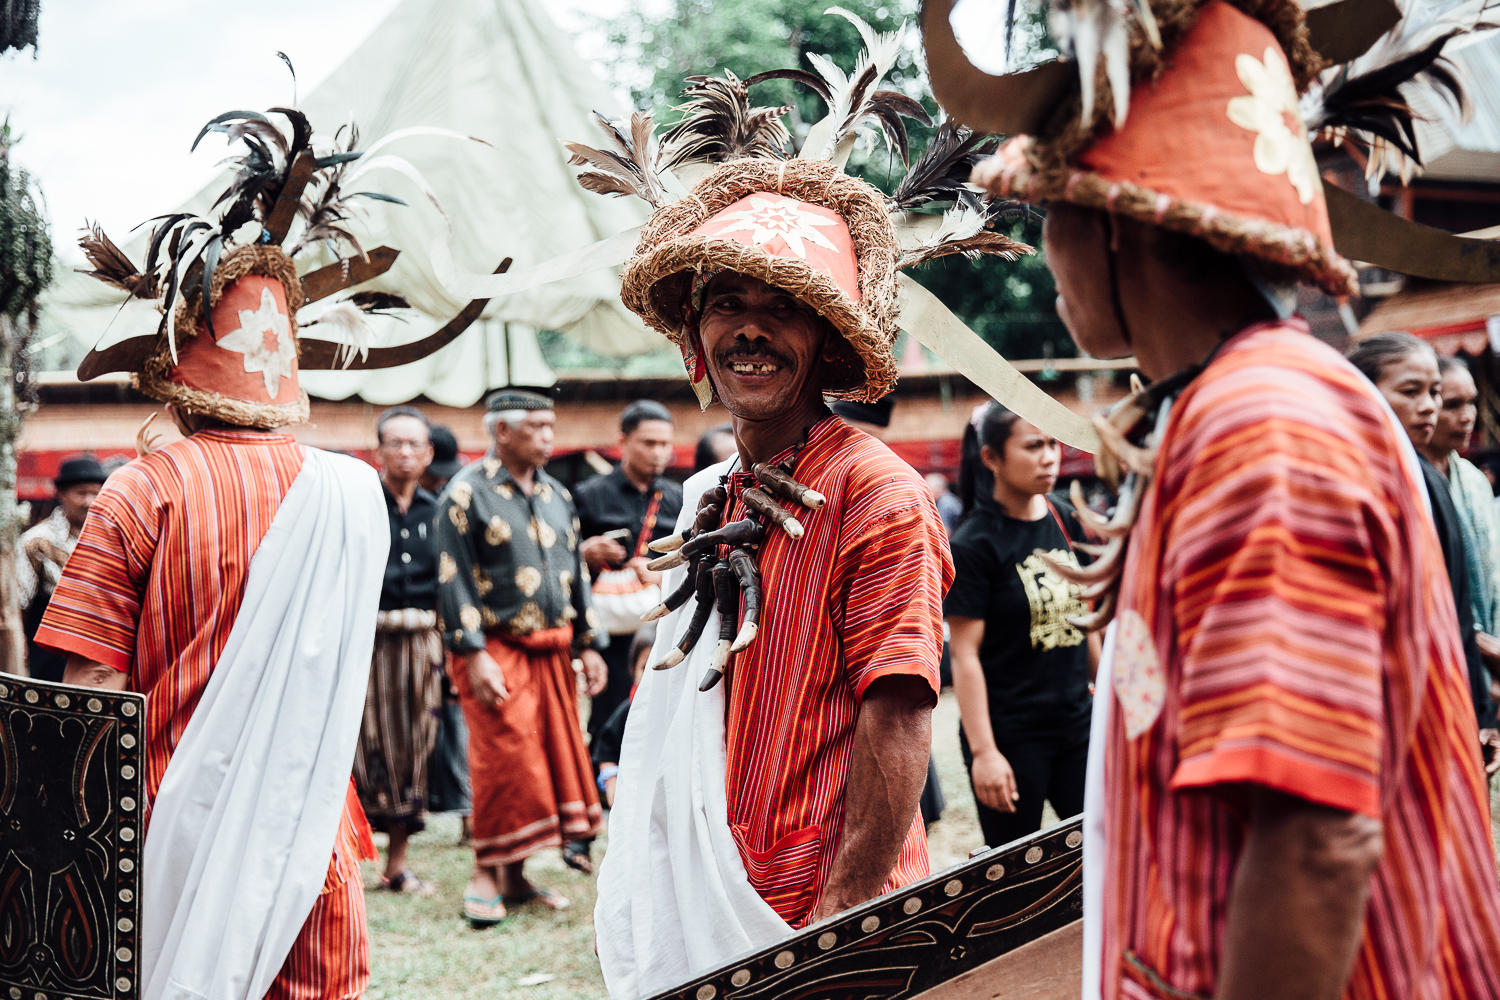 Two relatives share a moment of complicity during the funeral procession. For Torajans, death is a rite of passage, an access to the world of their ancestors. Family and friends come from all around the world for the ceremony to parade and bring offerings.